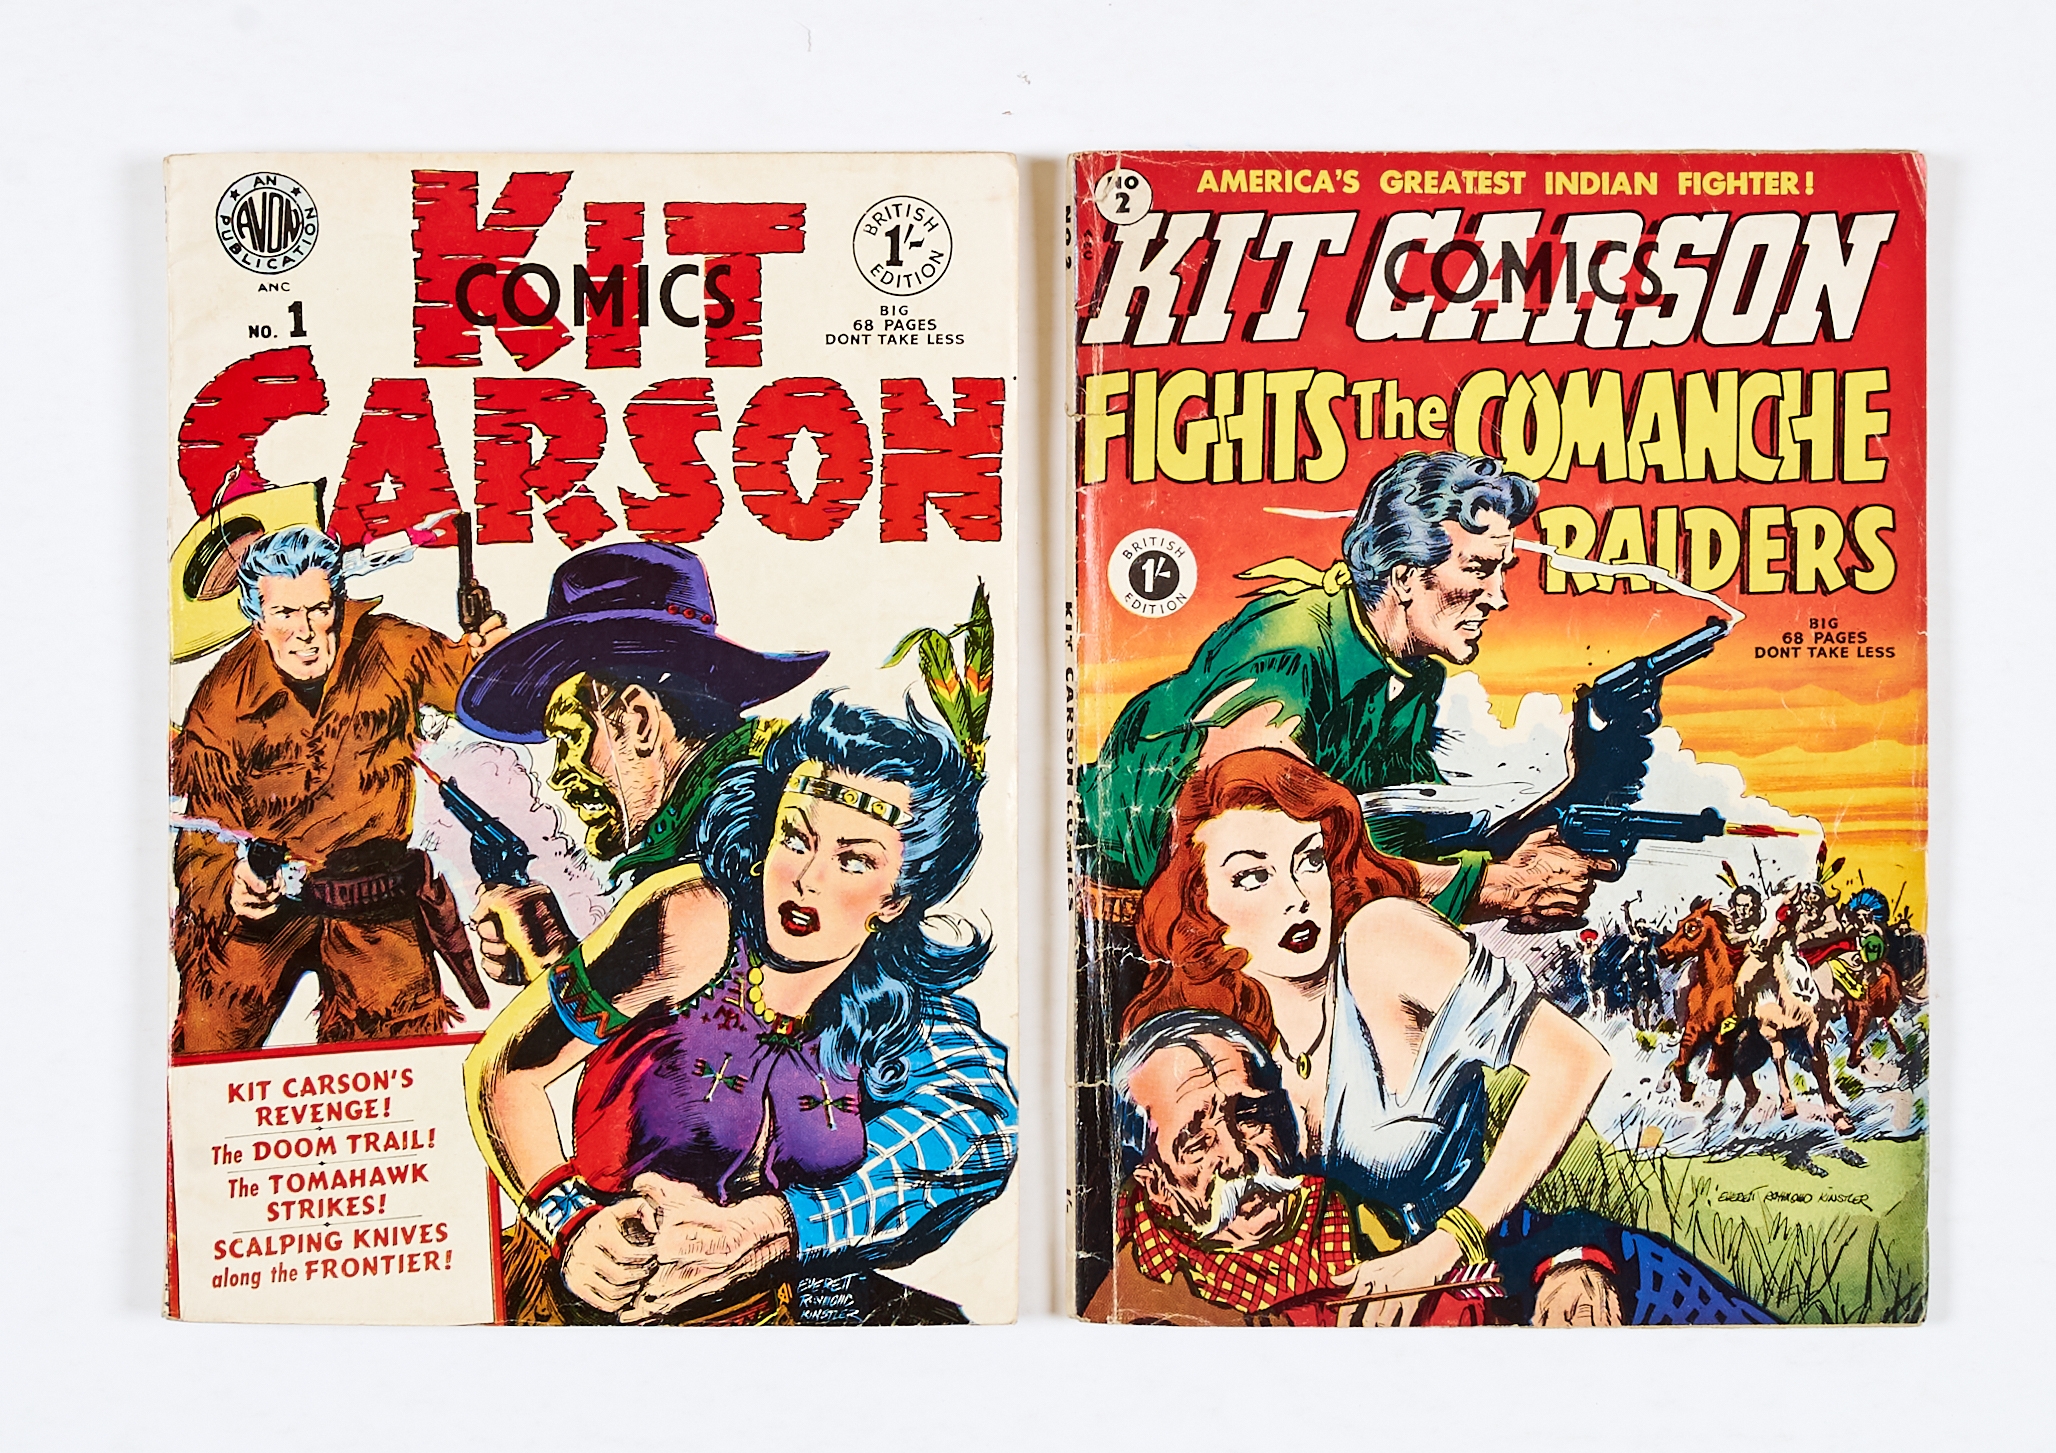 Kit Carson (Thorpe & Porter 1952) 1, 2. Only these two issues were reprinted from the US Avon